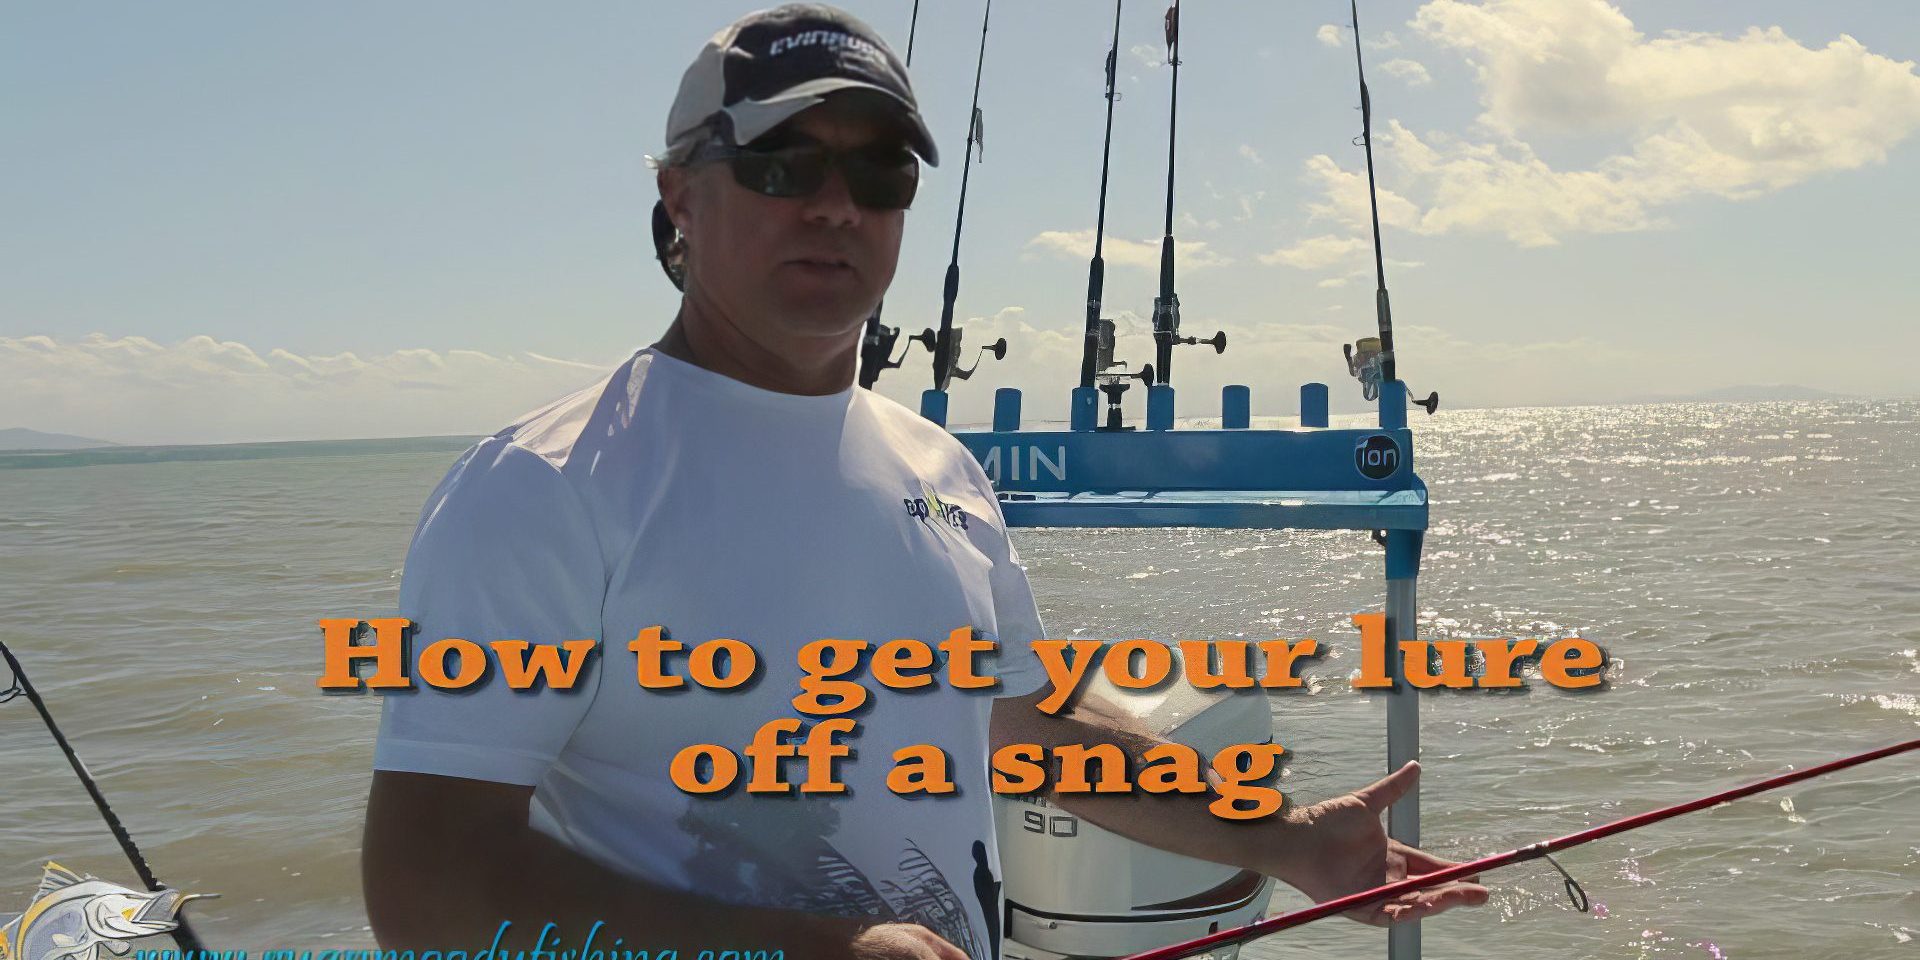 Best way to get lures off snags - Ryan Moody Fishing